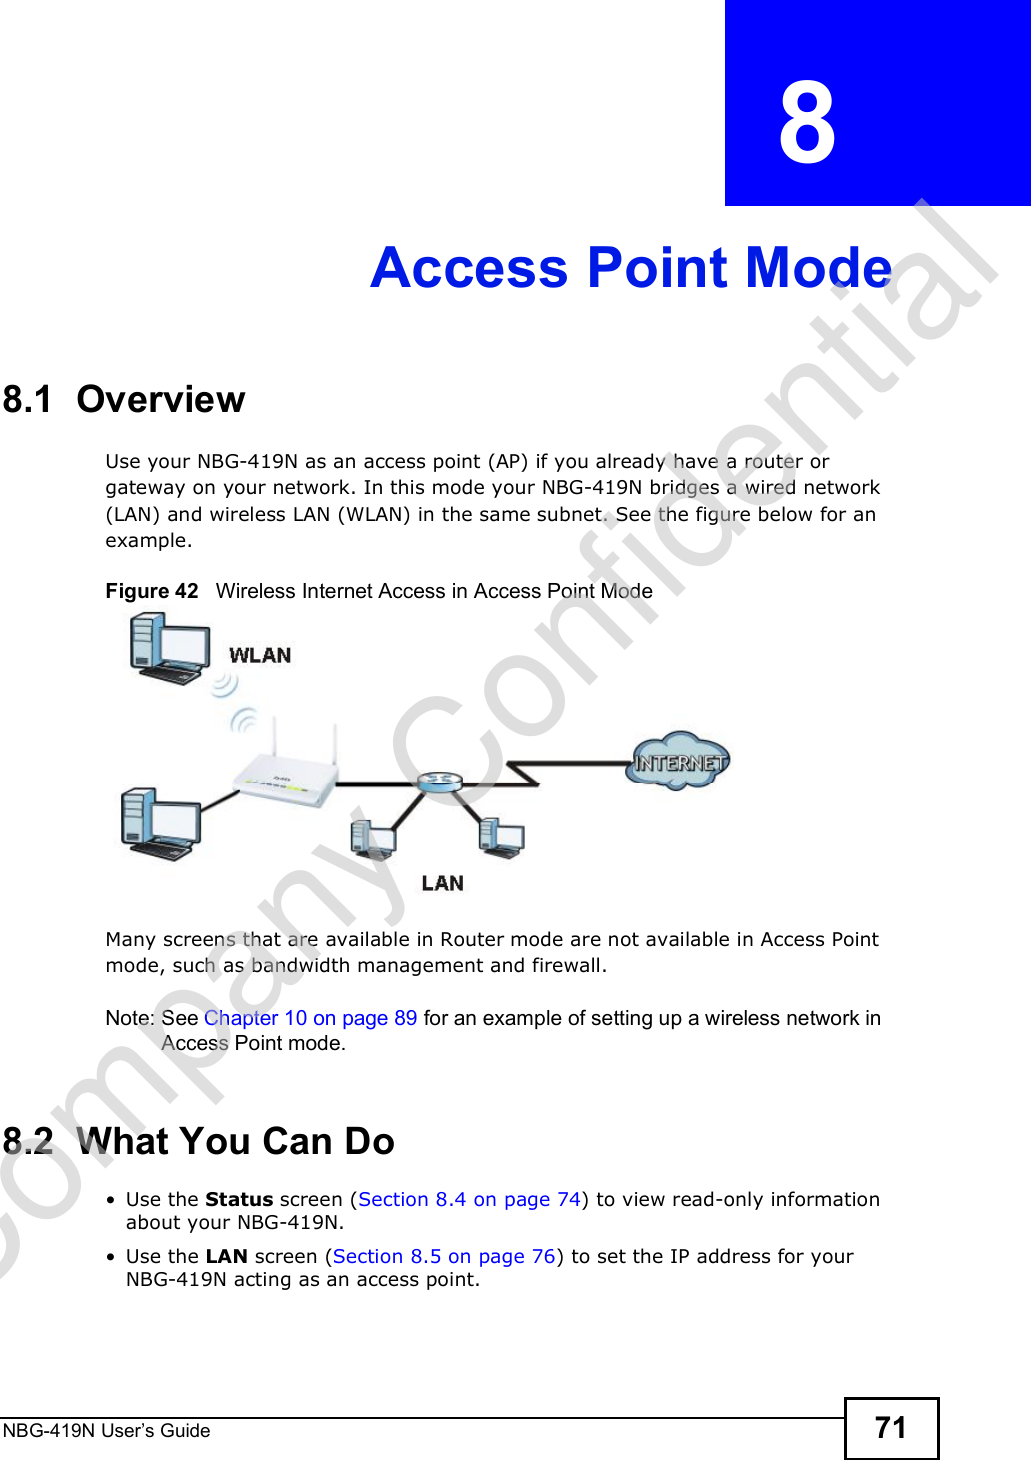 NBG-419N User s Guide 71CHAPTER  8 Access Point Mode8.1  OverviewUse your NBG-419N as an access point (AP) if you already have a router or gateway on your network. In this mode your NBG-419N bridges a wired network (LAN) and wireless LAN (WLAN) in the same subnet. See the figure below for an example.Figure 42   Wireless Internet Access in Access Point Mode Many screens that are available in Router mode are not available in Access Point mode, such as bandwidth management and firewall.Note: See Chapter 10 on page 89 for an example of setting up a wireless network in Access Point mode. 8.2  What You Can Do Use the Status screen (Section 8.4 on page 74) to view read-only information about your NBG-419N. Use the LAN screen (Section 8.5 on page 76) to set the IP address for your NBG-419N acting as an access point.Company Confidential